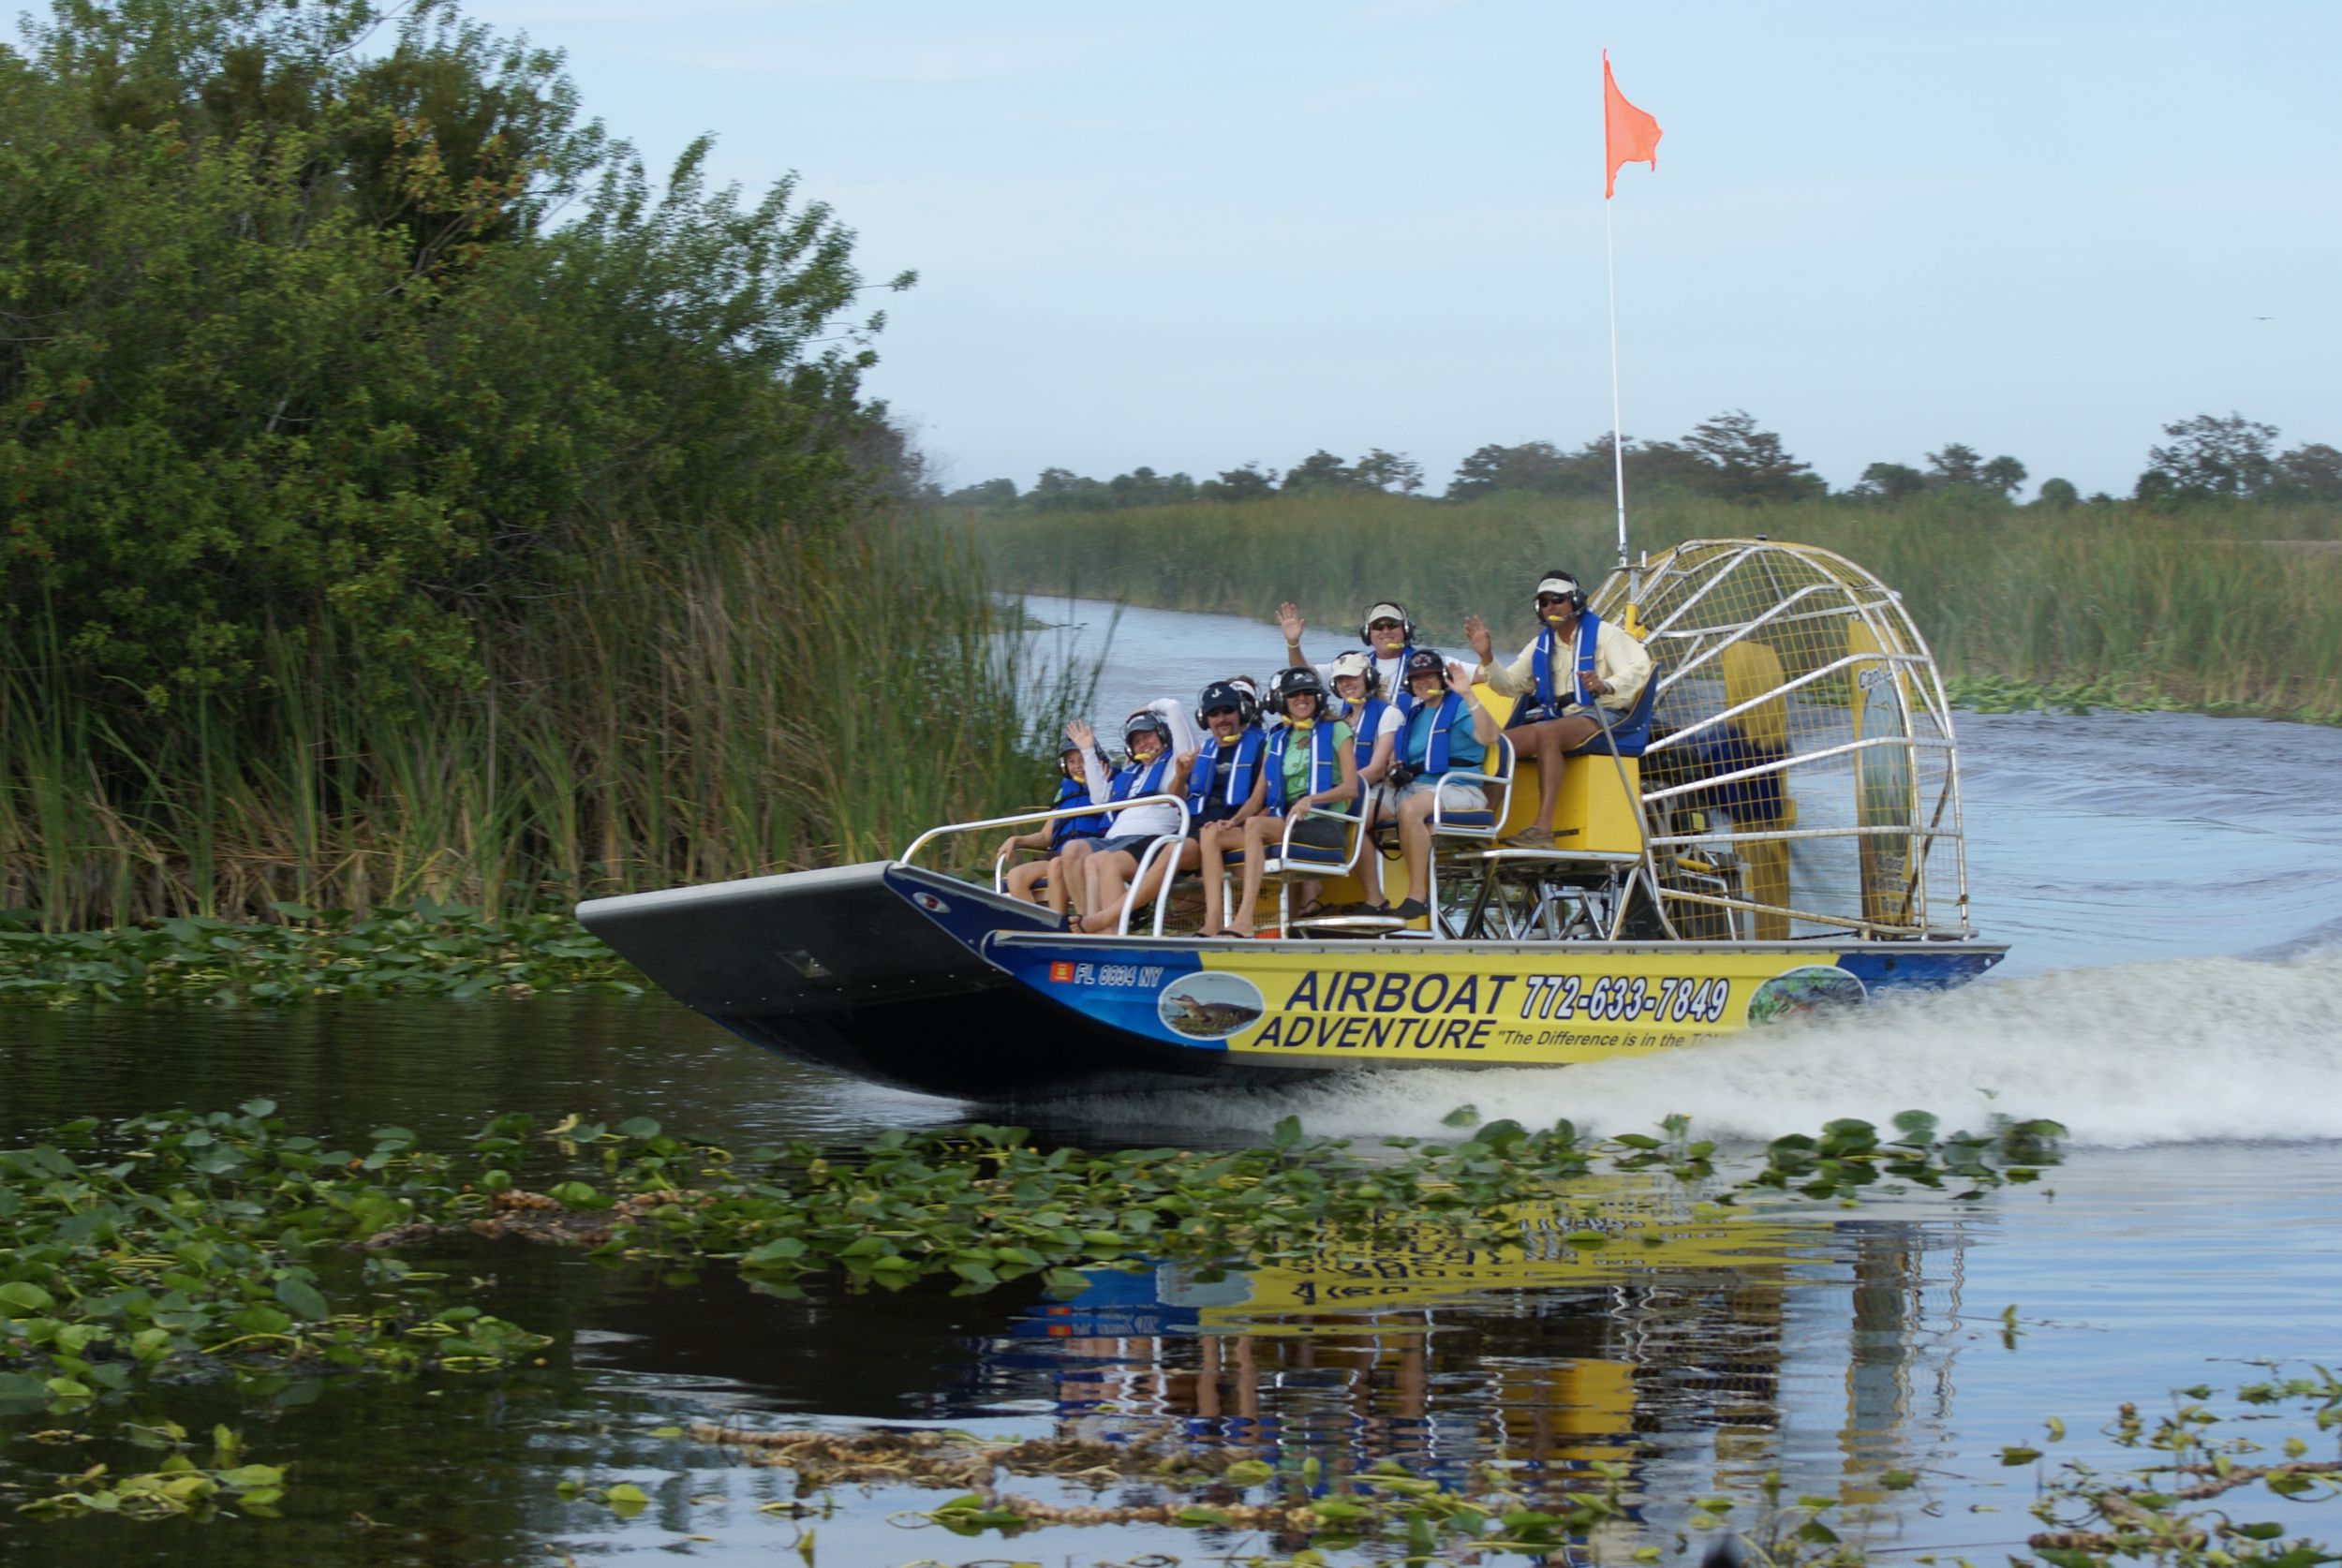 People enjoying an airboat tour on a sunny day.